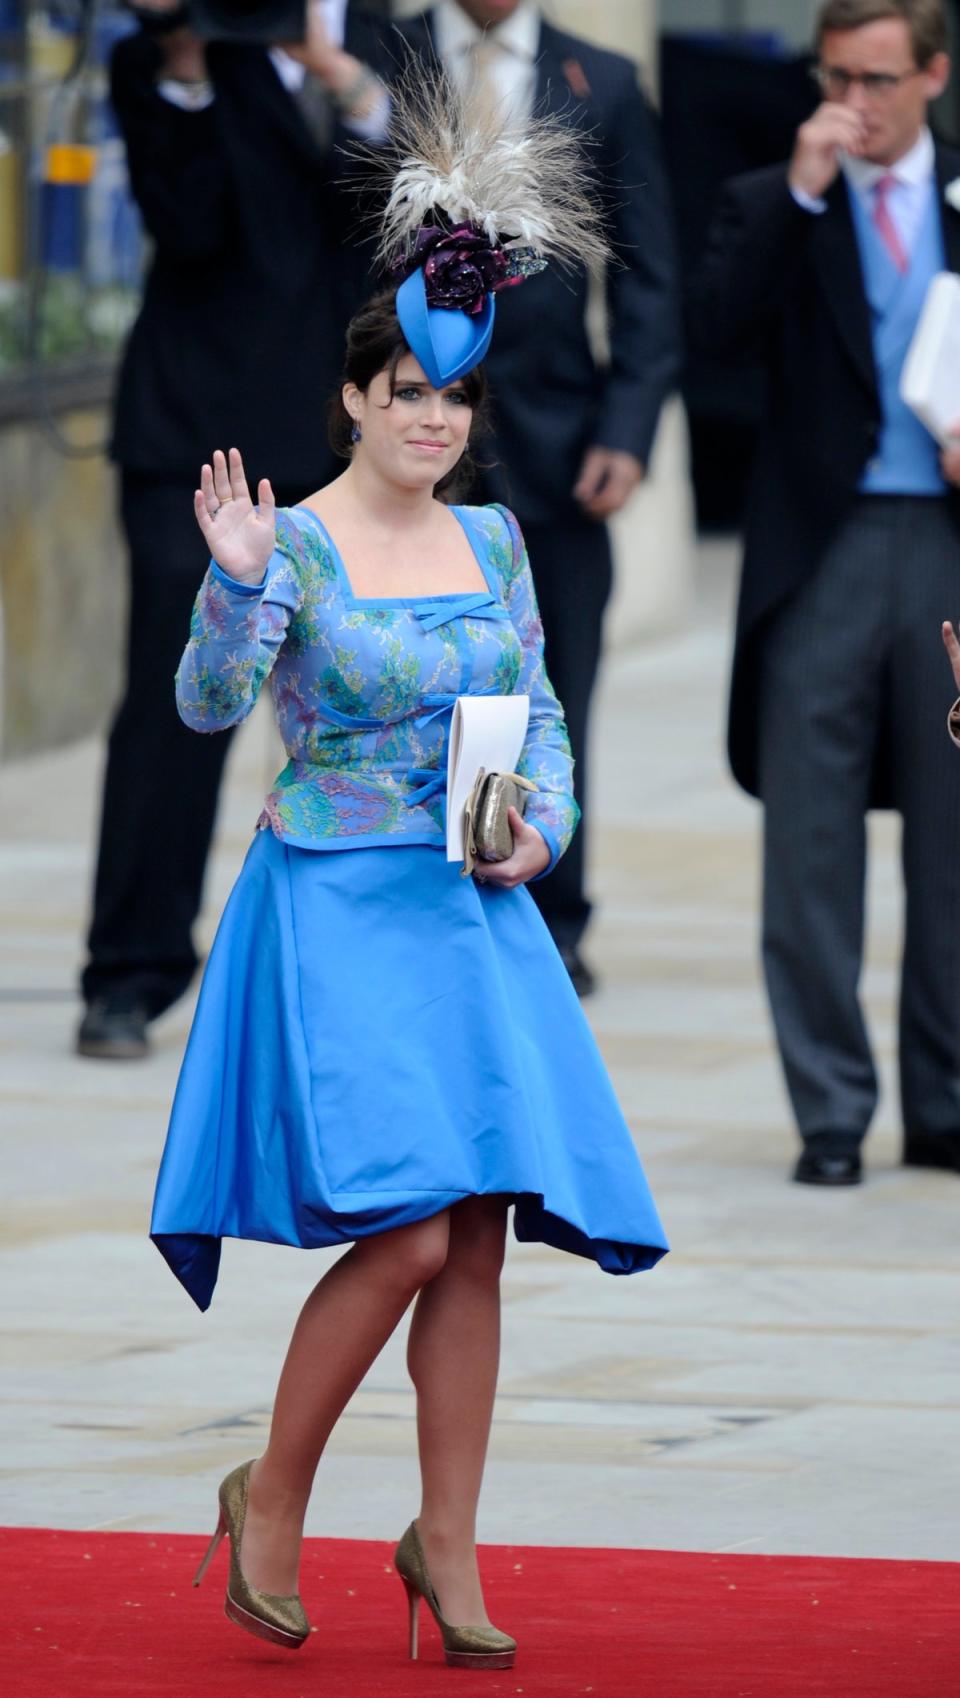 Princess Eugenie waves as she leaves Westminster Abbey in London following Prince William and Kate's wedding service in 2011 (AFP via Getty Images)